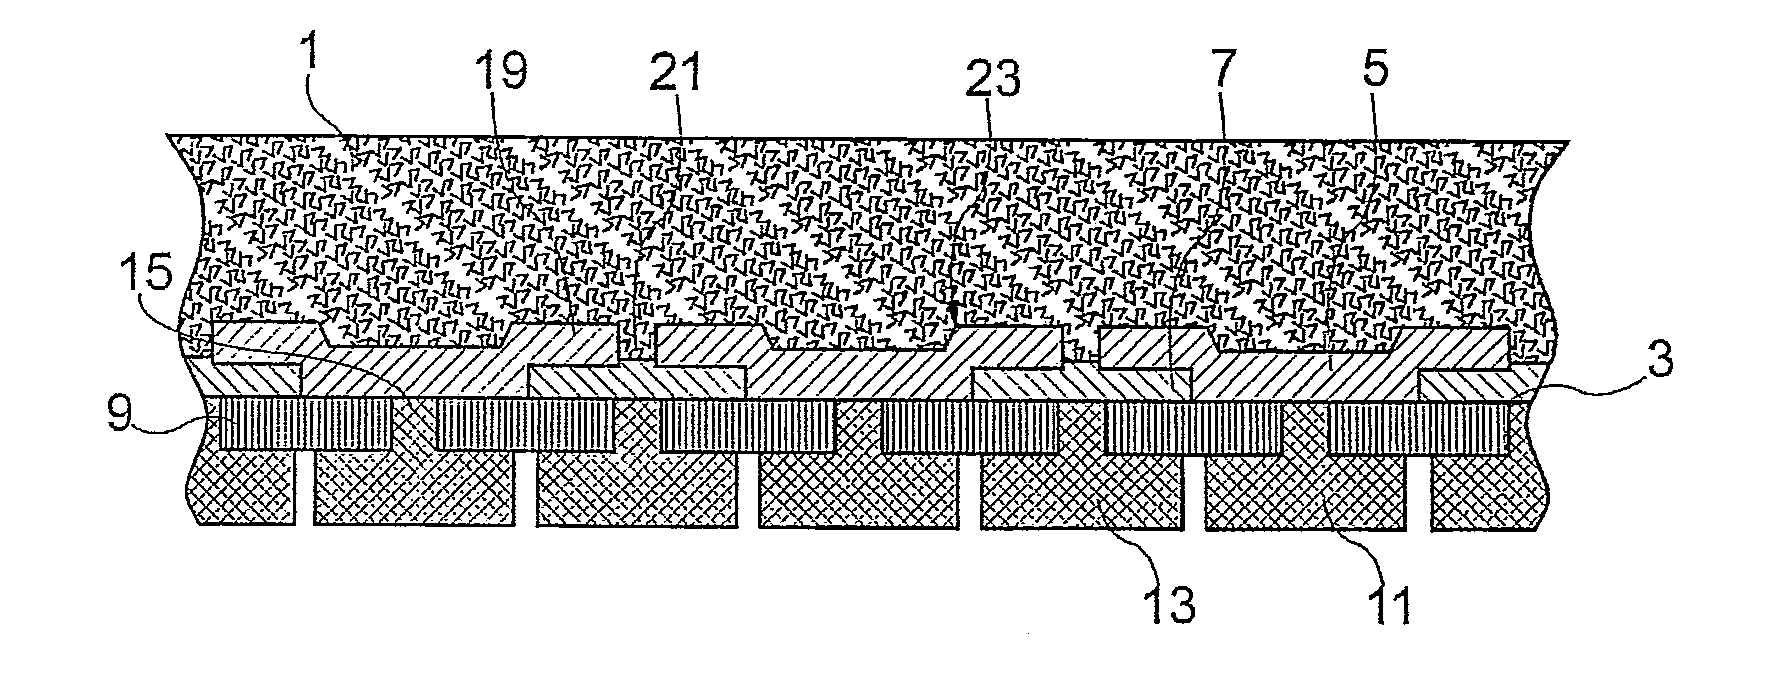 Rear-contact solar cell having extensive rear side emitter regions and method for producing the same